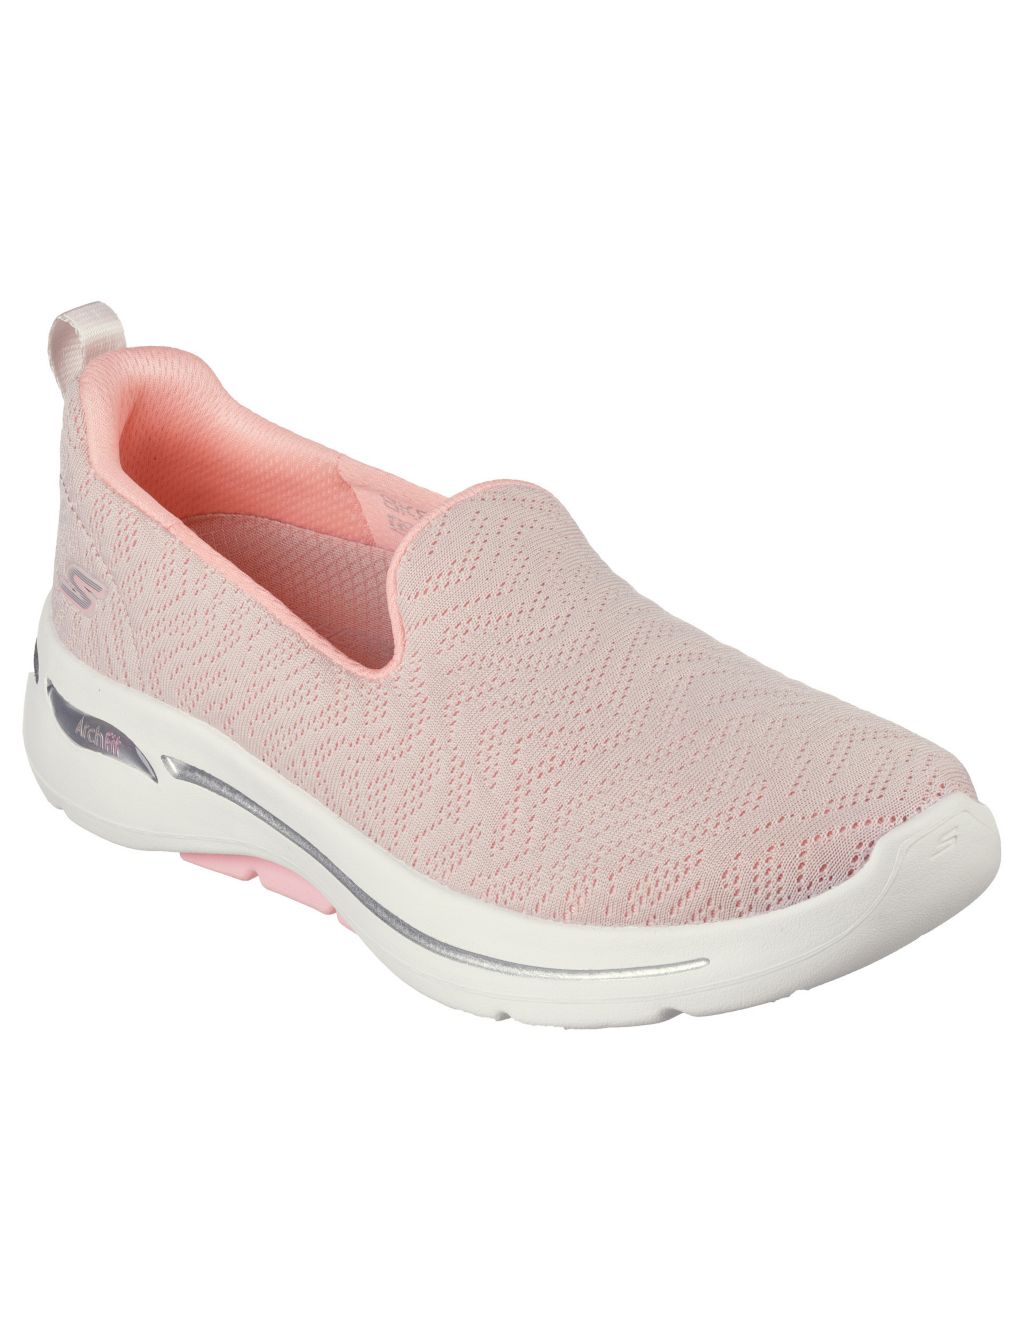 GOwalk Arch Fit Ocean Reef Knitted Trainers image 2